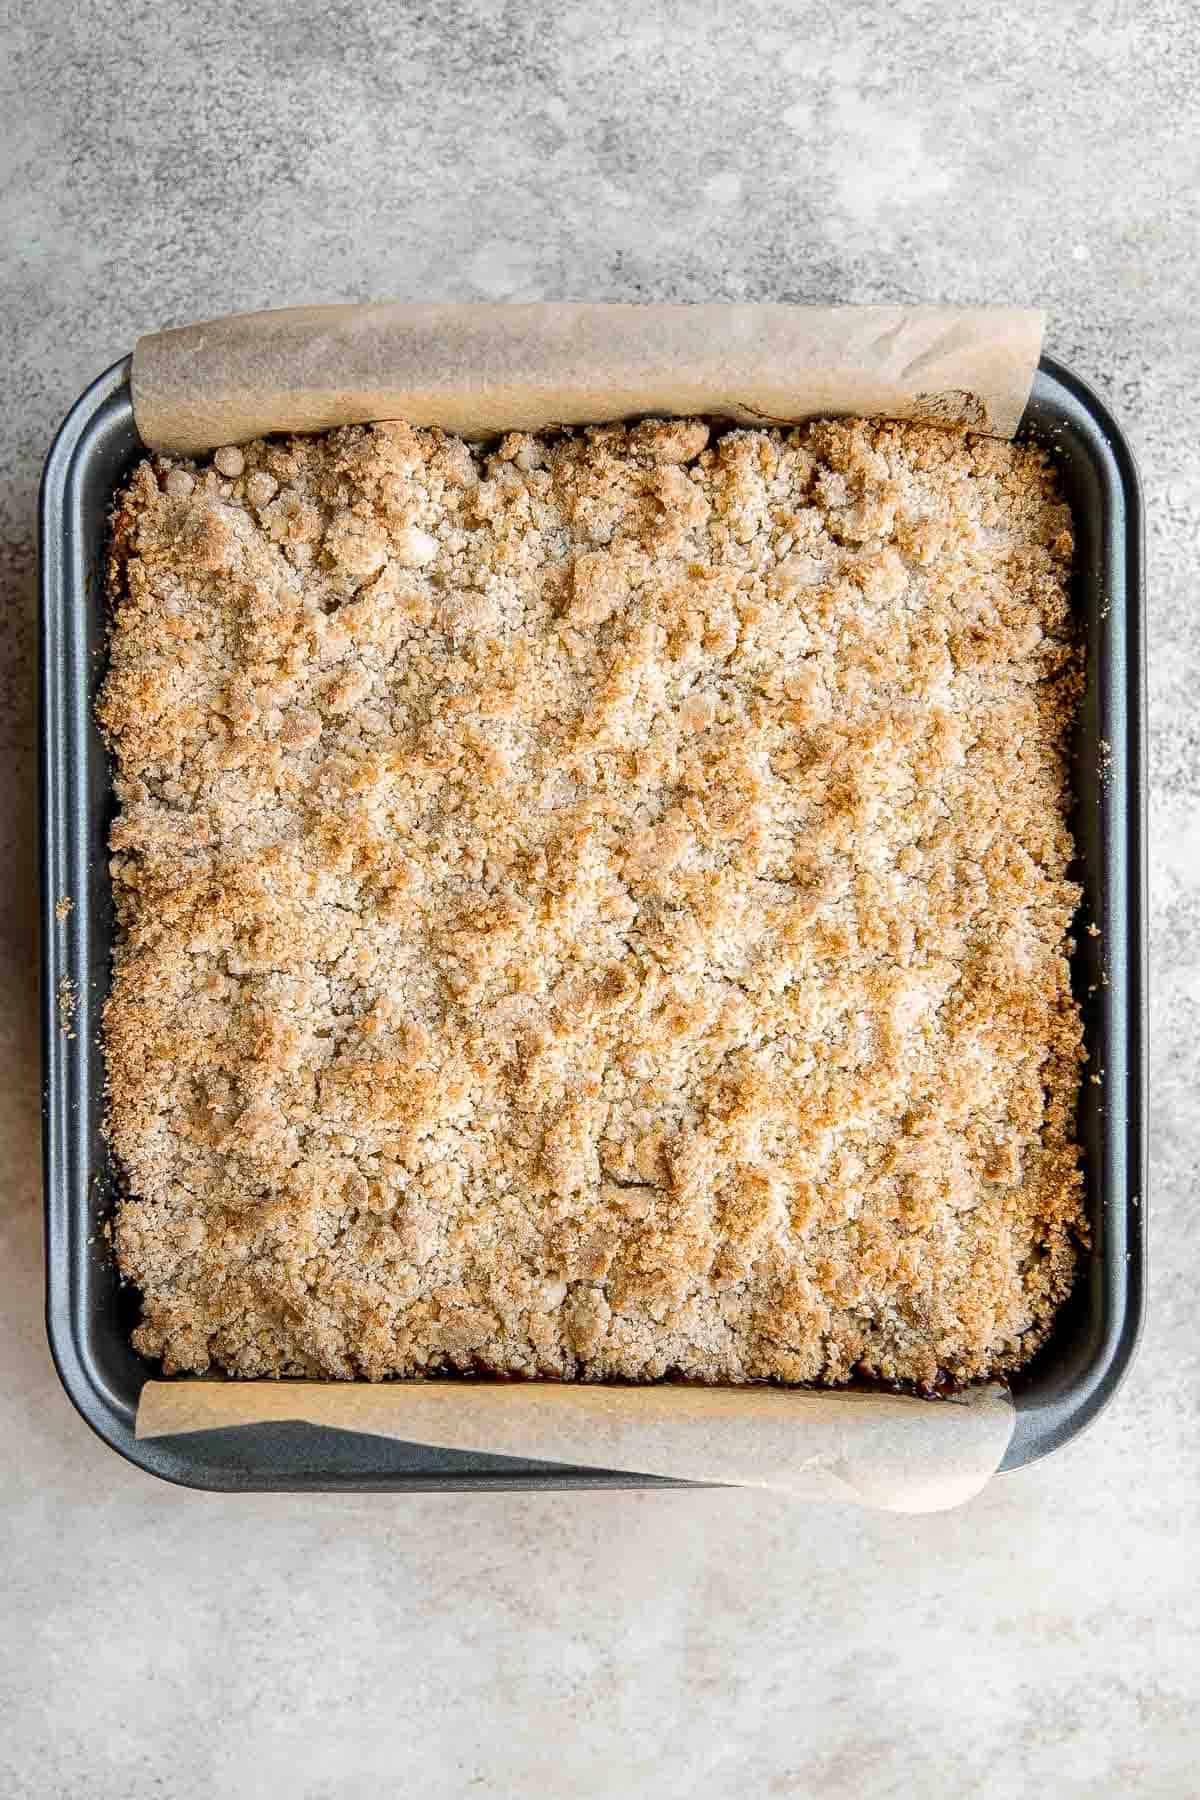 Homemade Apple Pie Bars are sweet, tart, and crumbly. With 3 delicious layers including a flaky pastry crust, cinnamon apple filling, and crumbly topping. | aheadofthyme.com